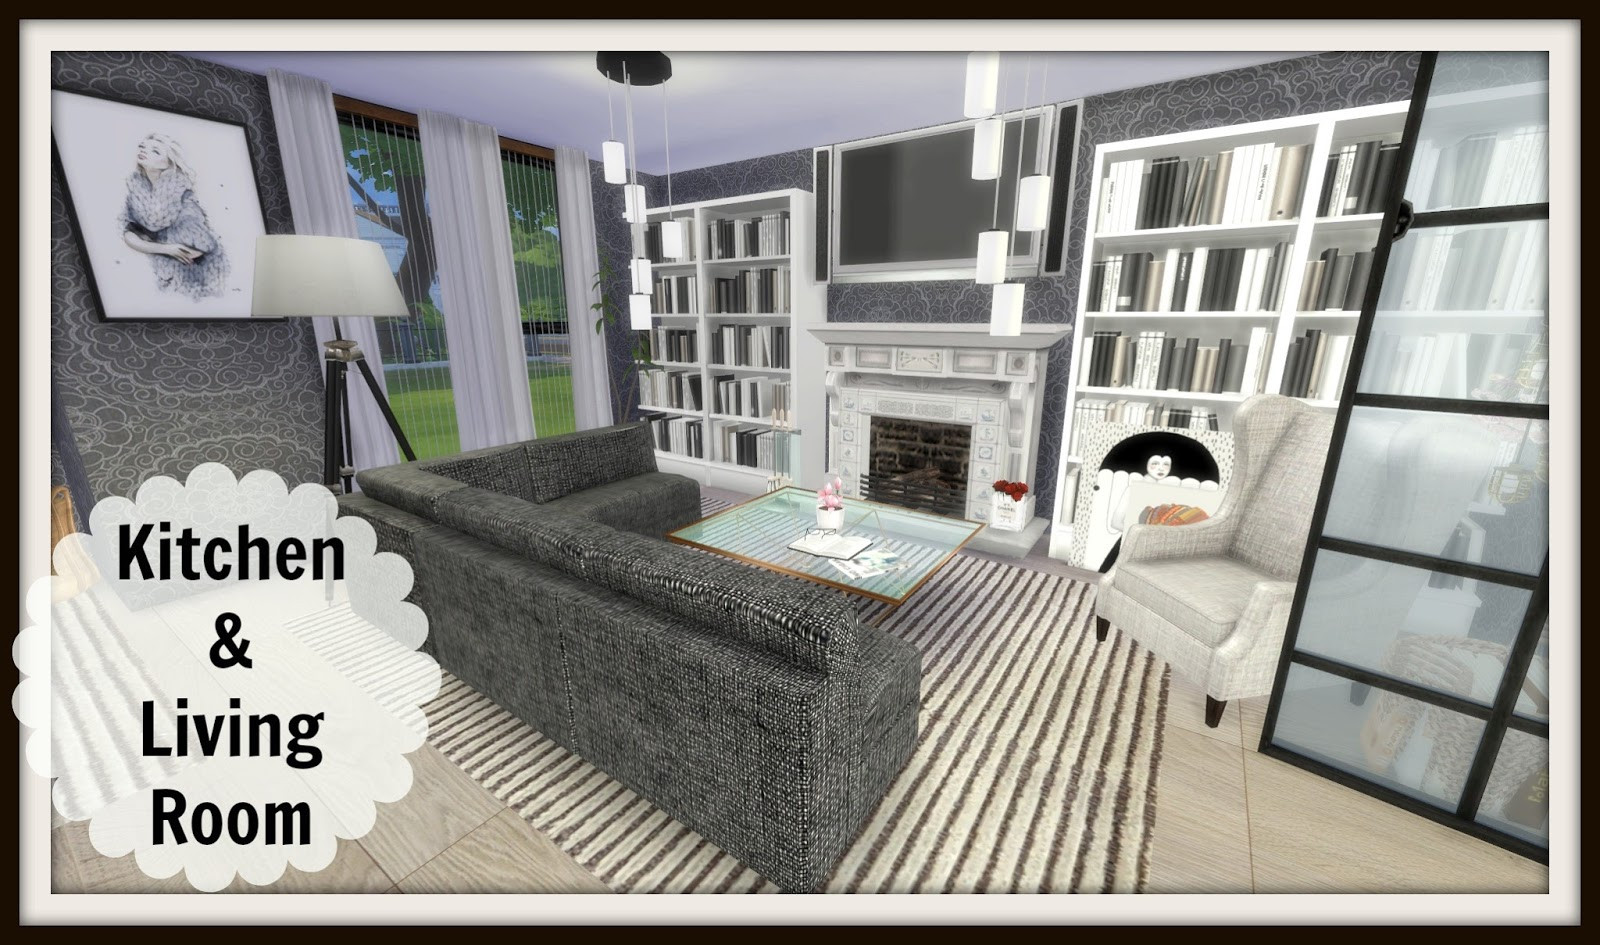 Sims 4 Living Room Ideas
 Sims 4 Kitchen & Living Room Dinha